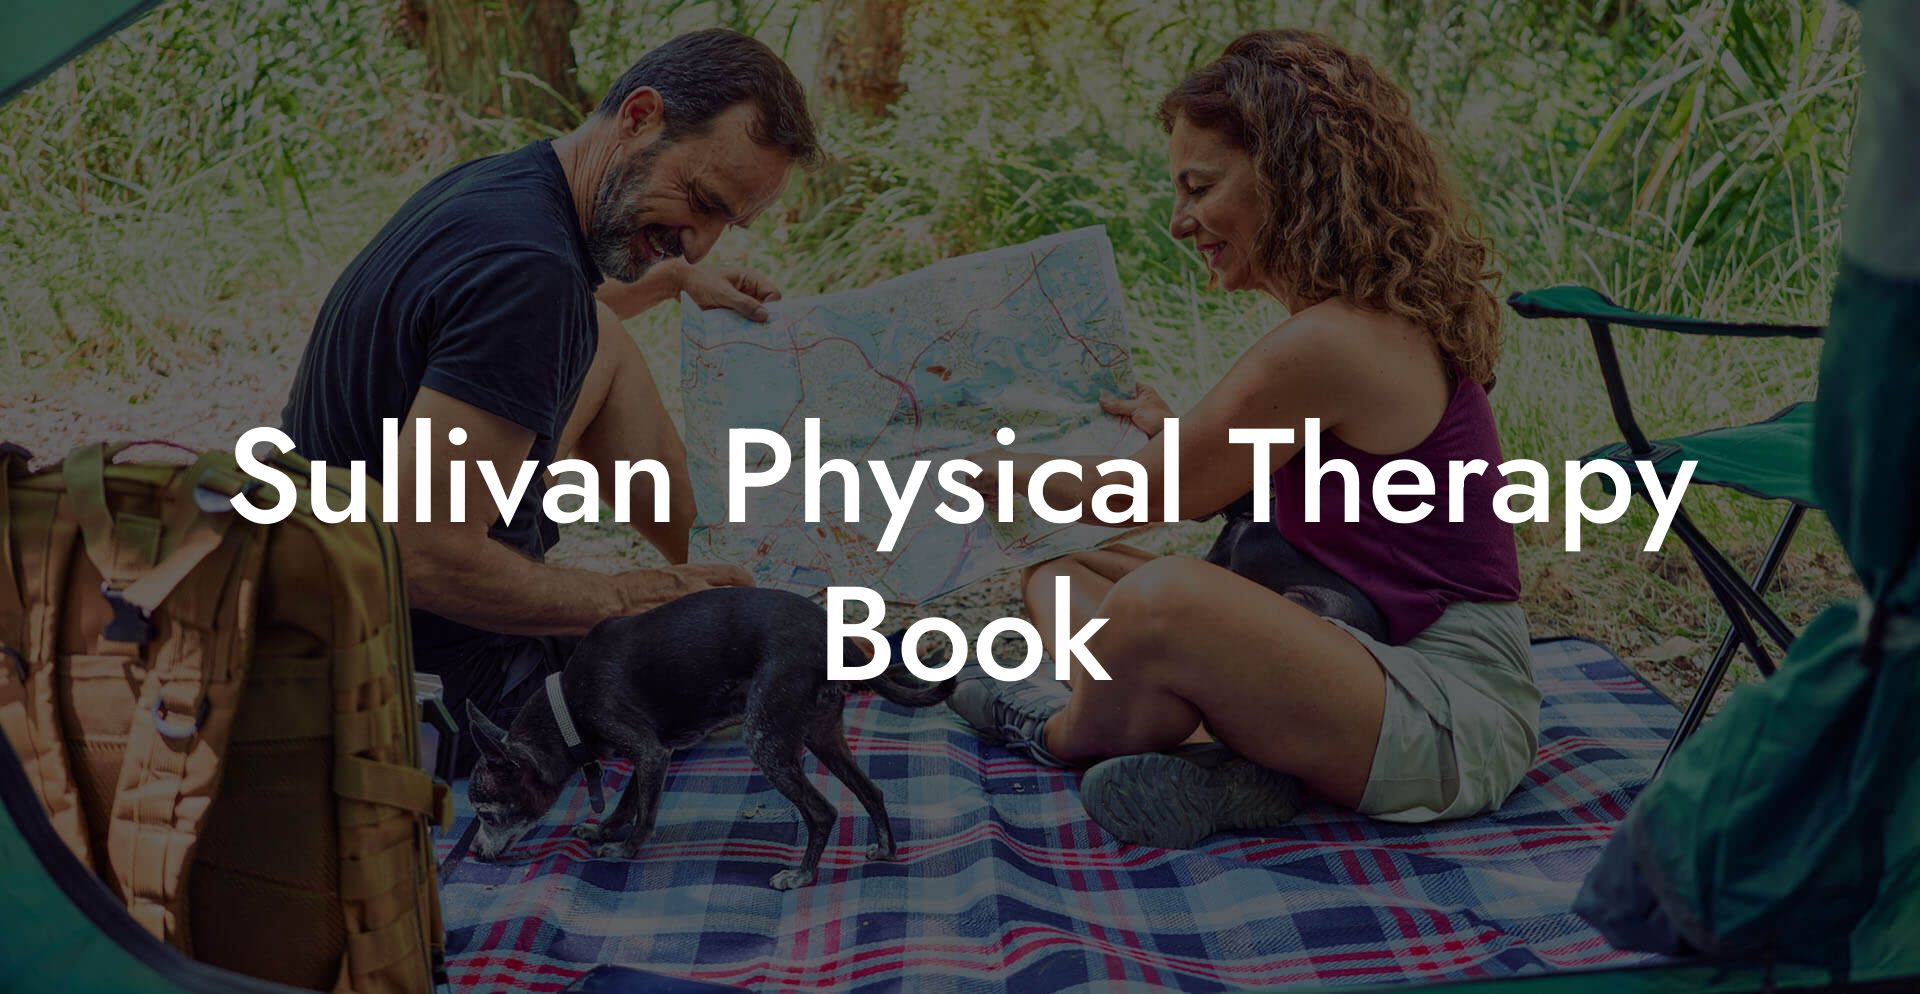 Sullivan Physical Therapy Book